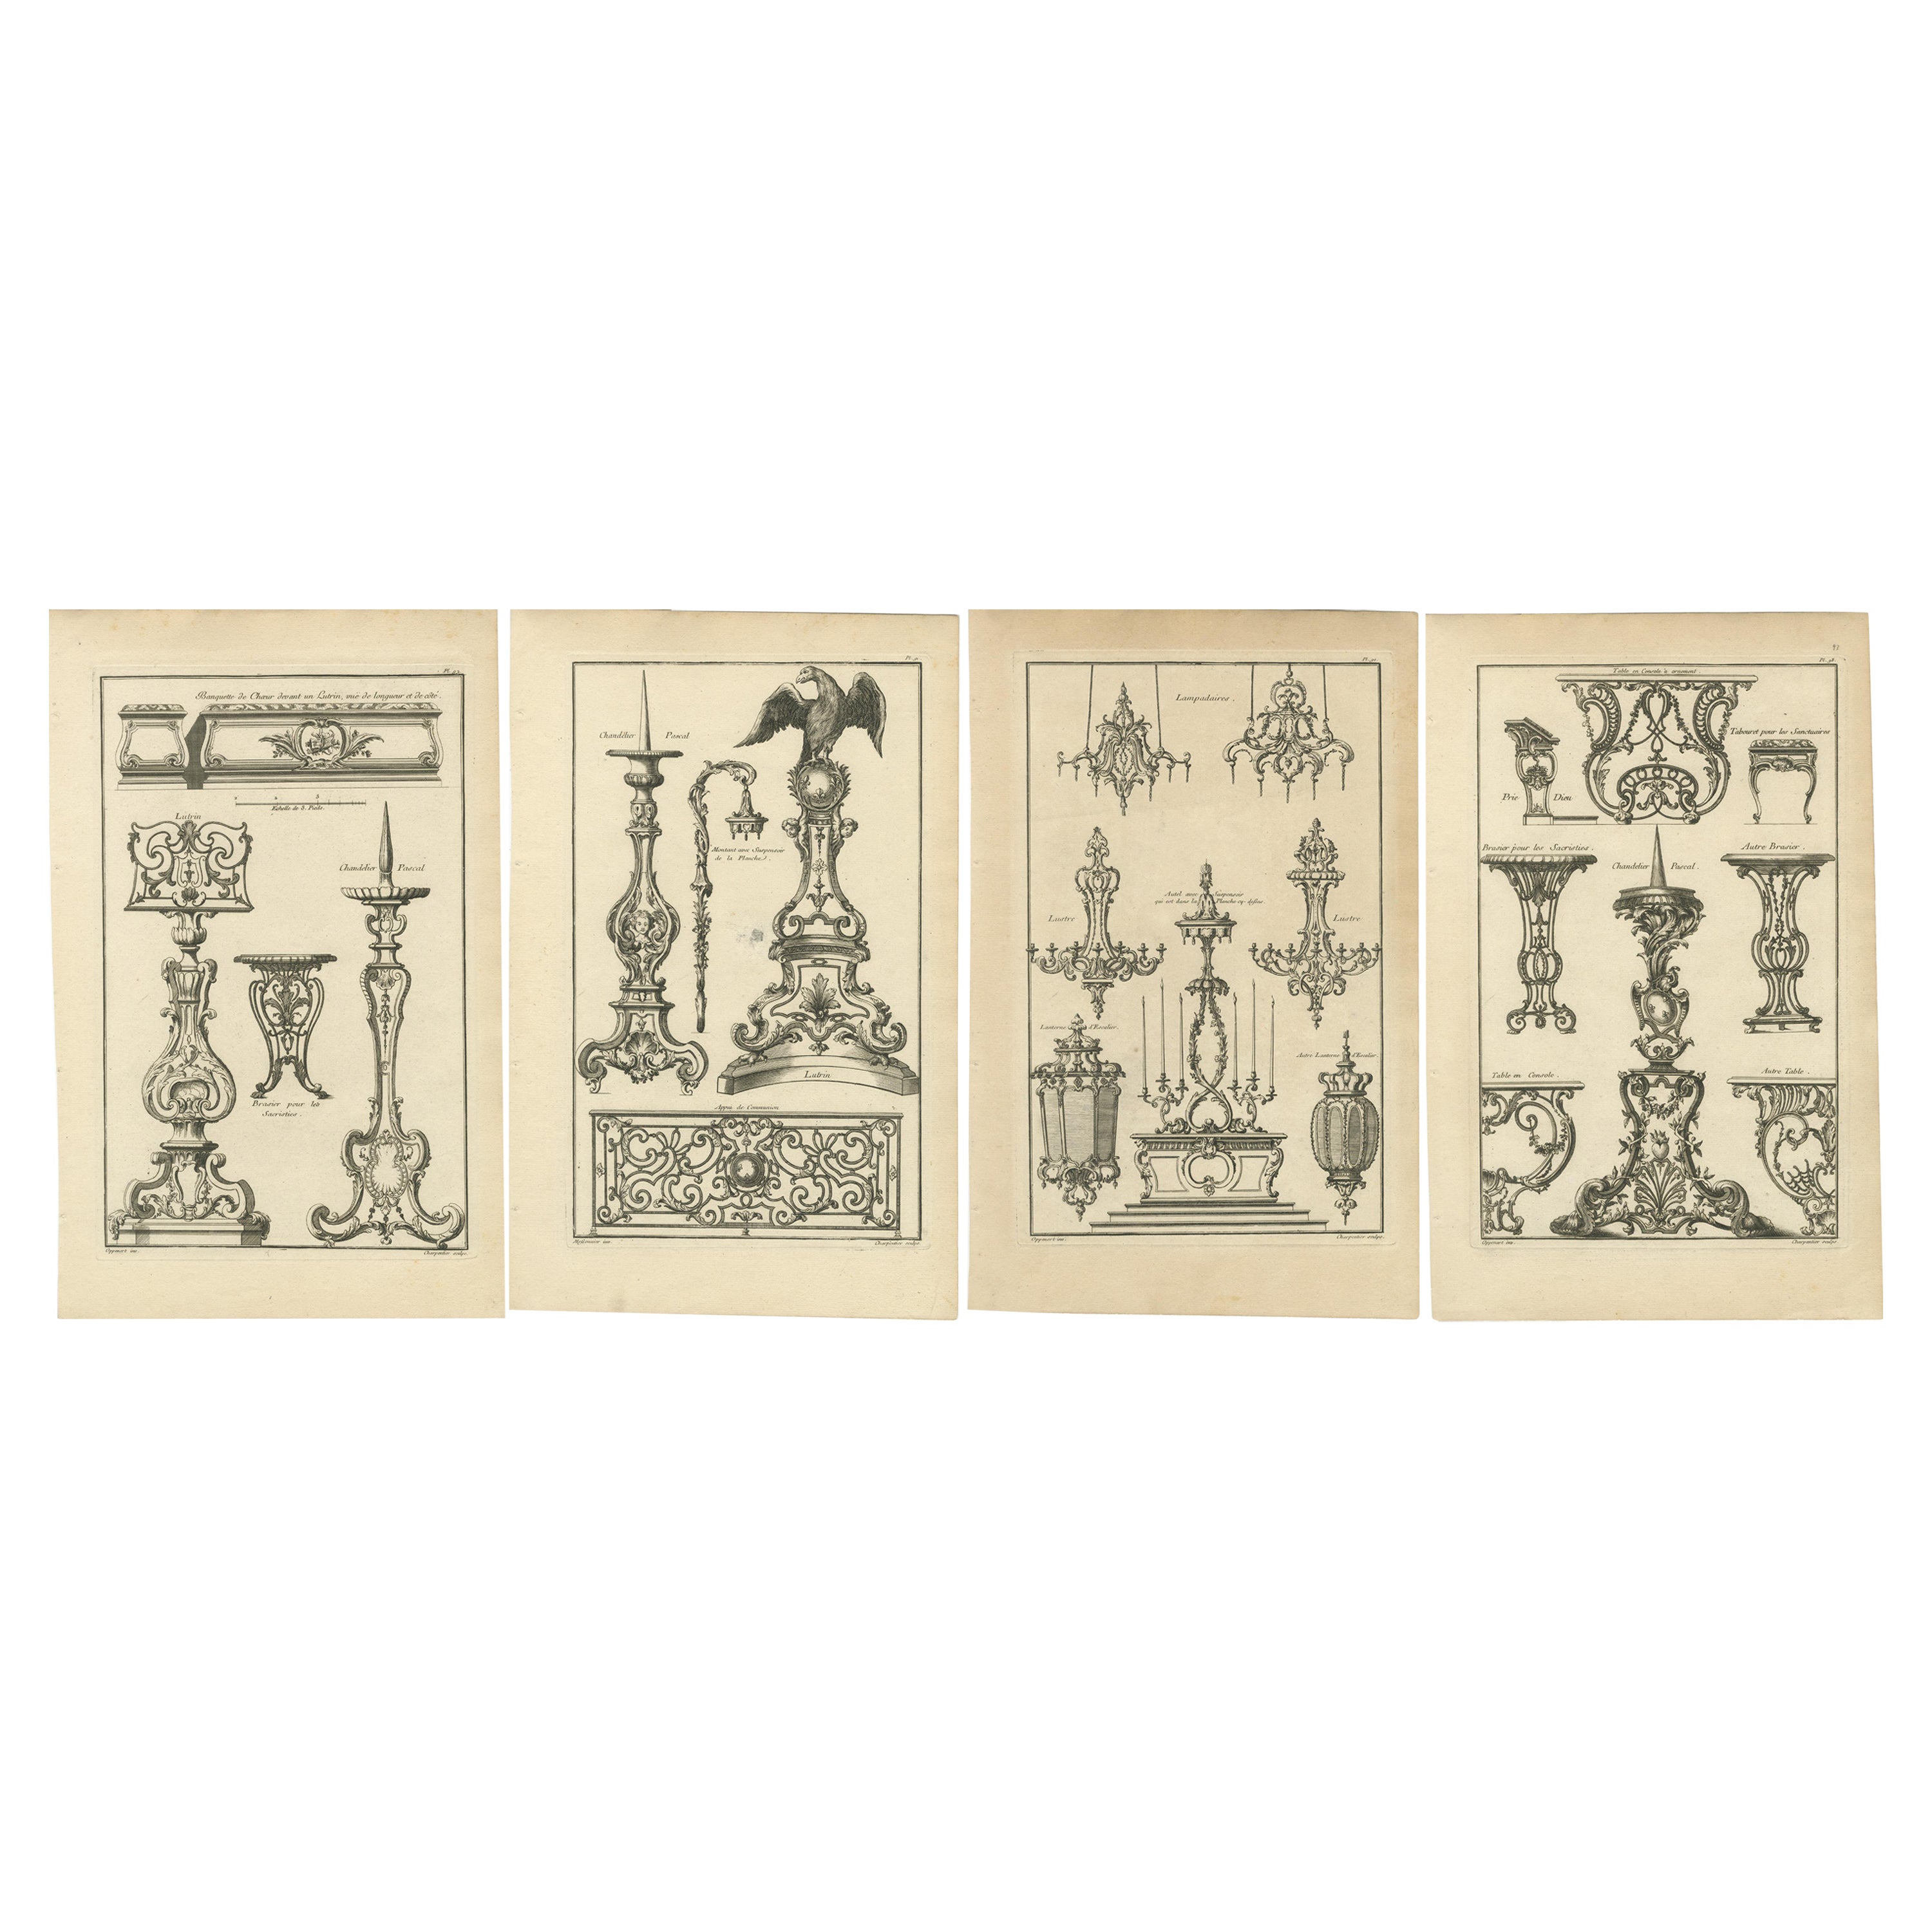 Baroque Ironwork Designs: Tables and Candelabras Engraved, 1767 For Sale